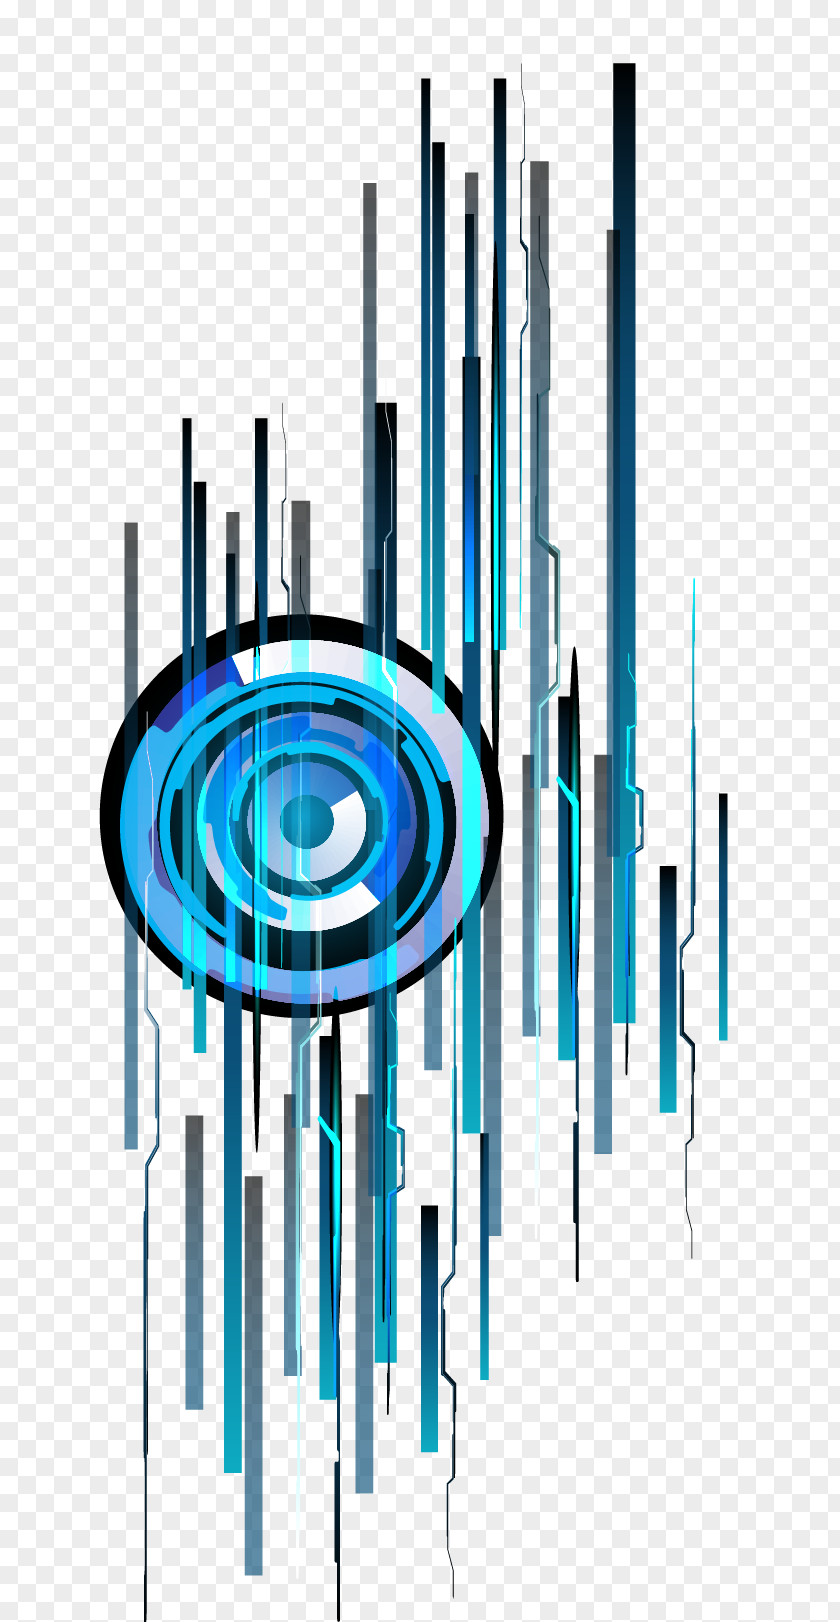 SCIENCE AND TECHNOLOGY Blue Circle Vector Border Graphic Design PNG